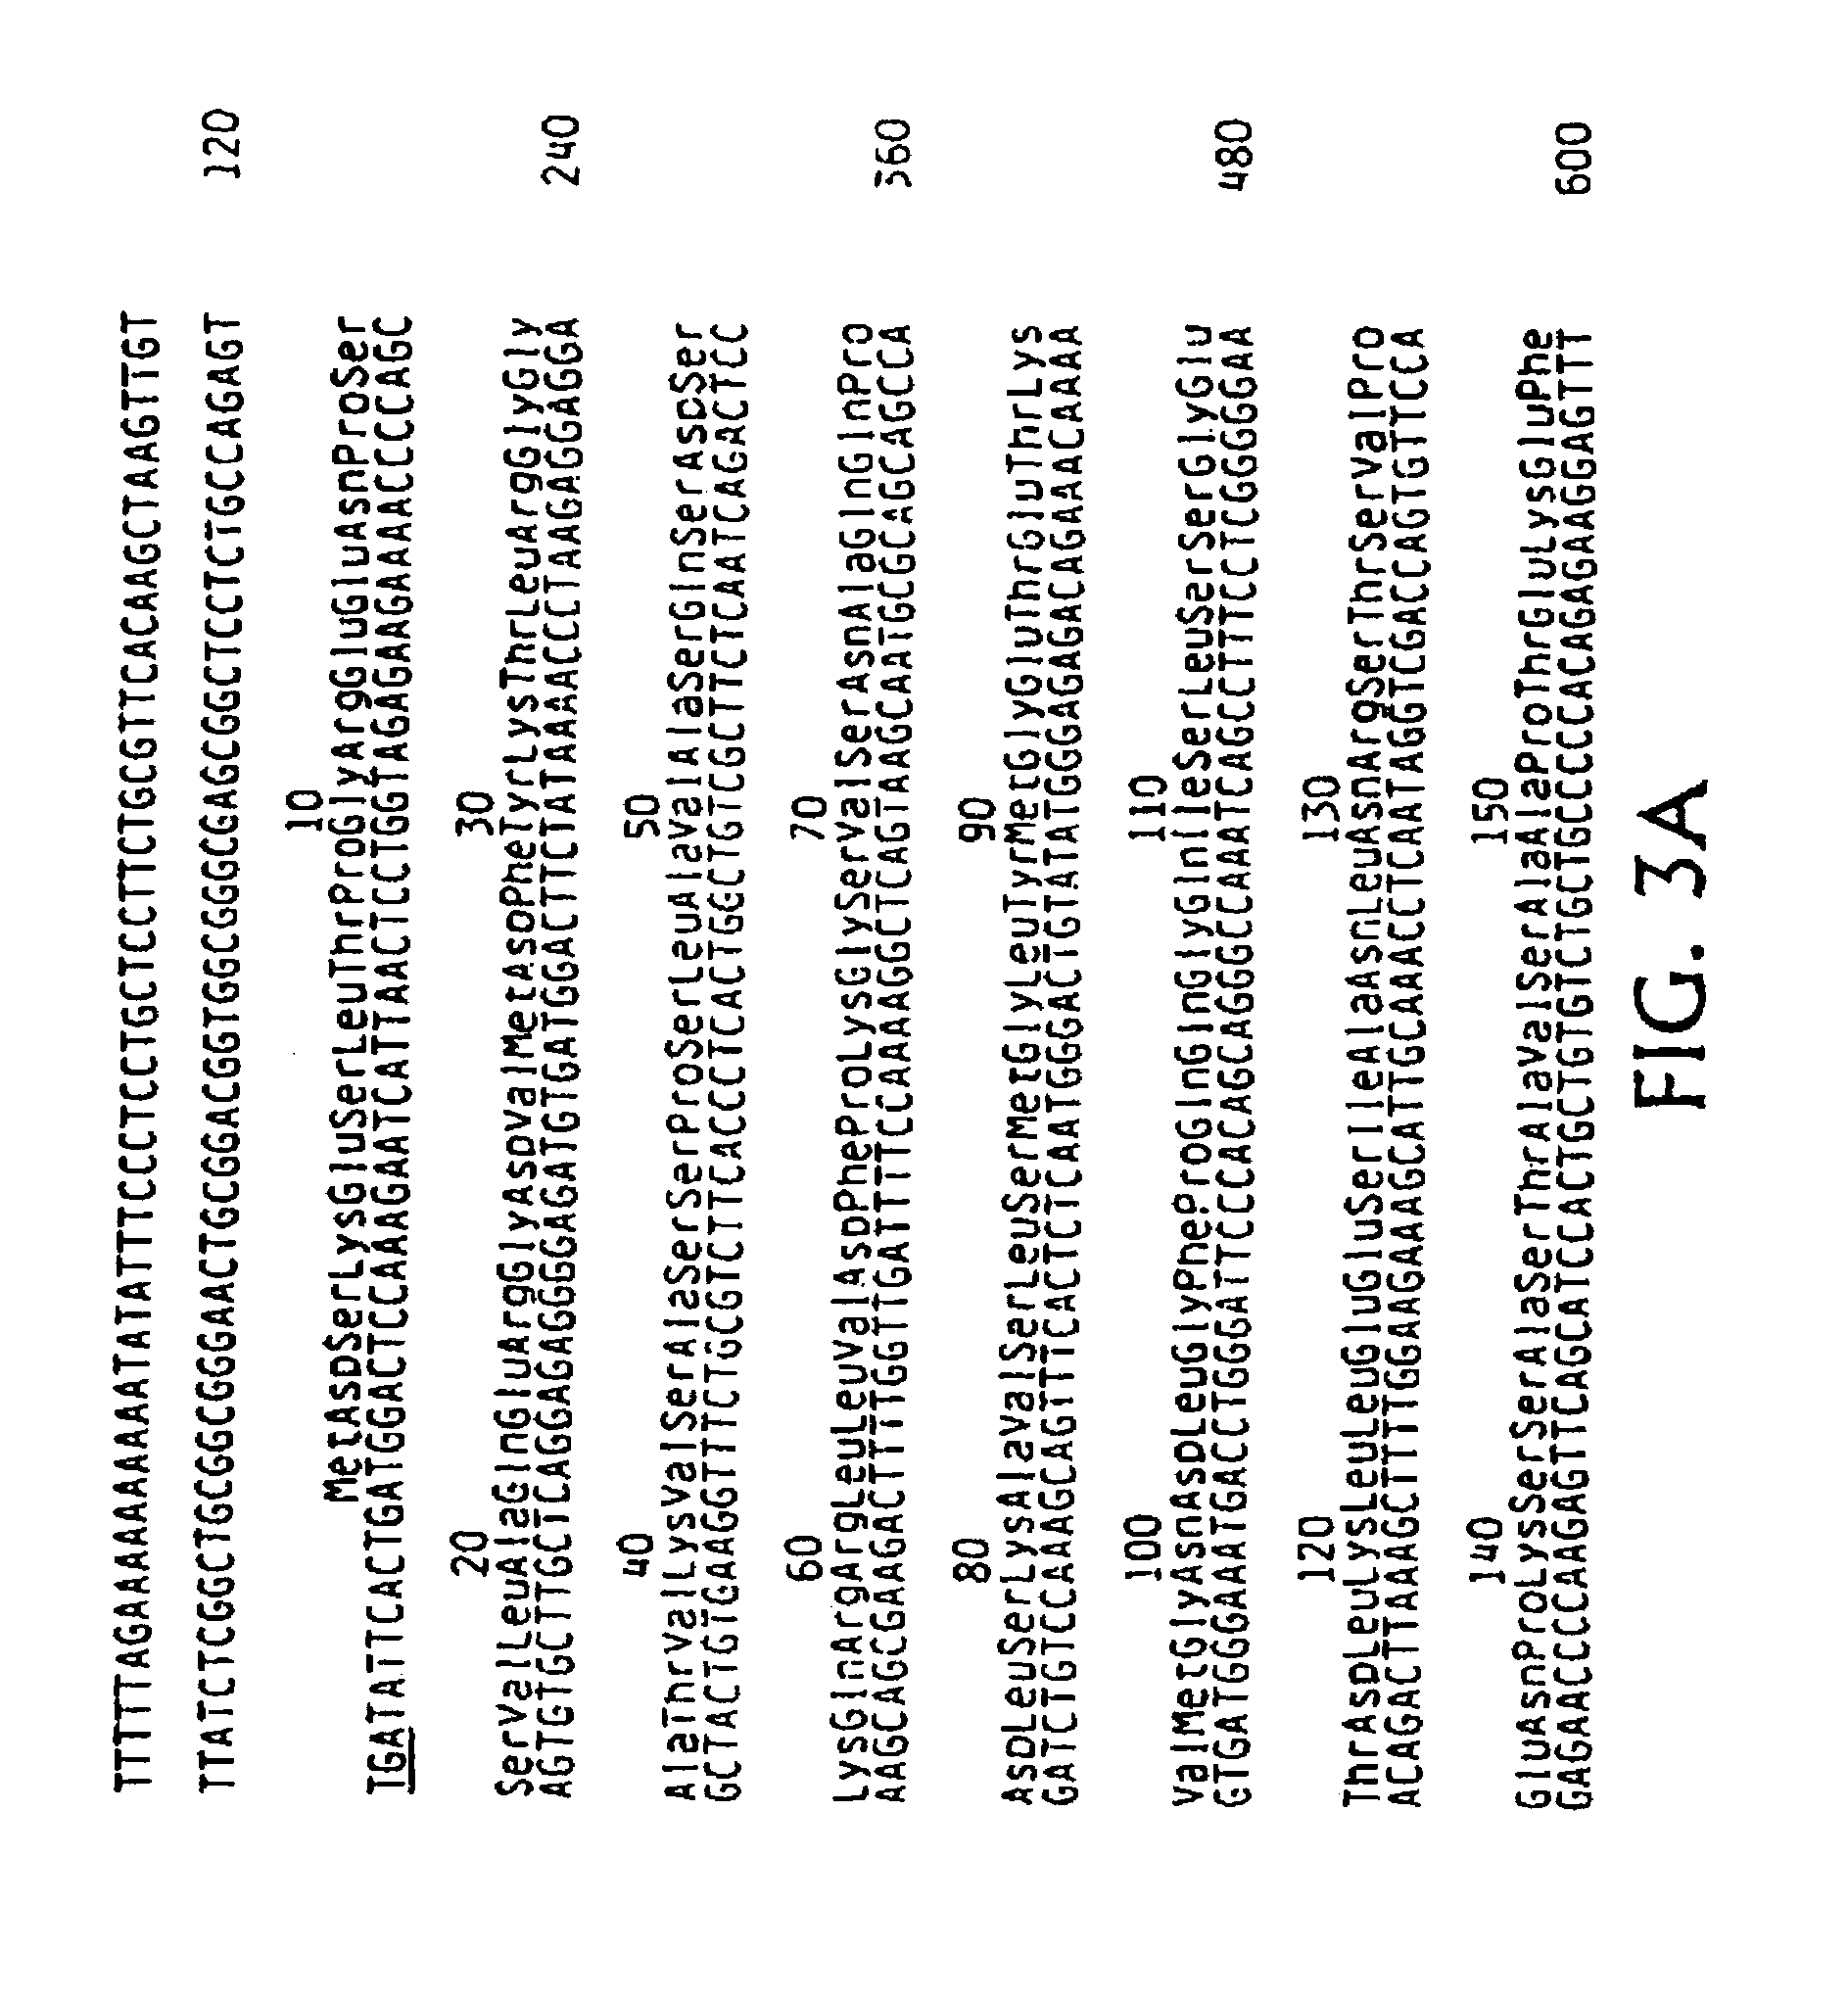 Hormone receptor compositions and methods